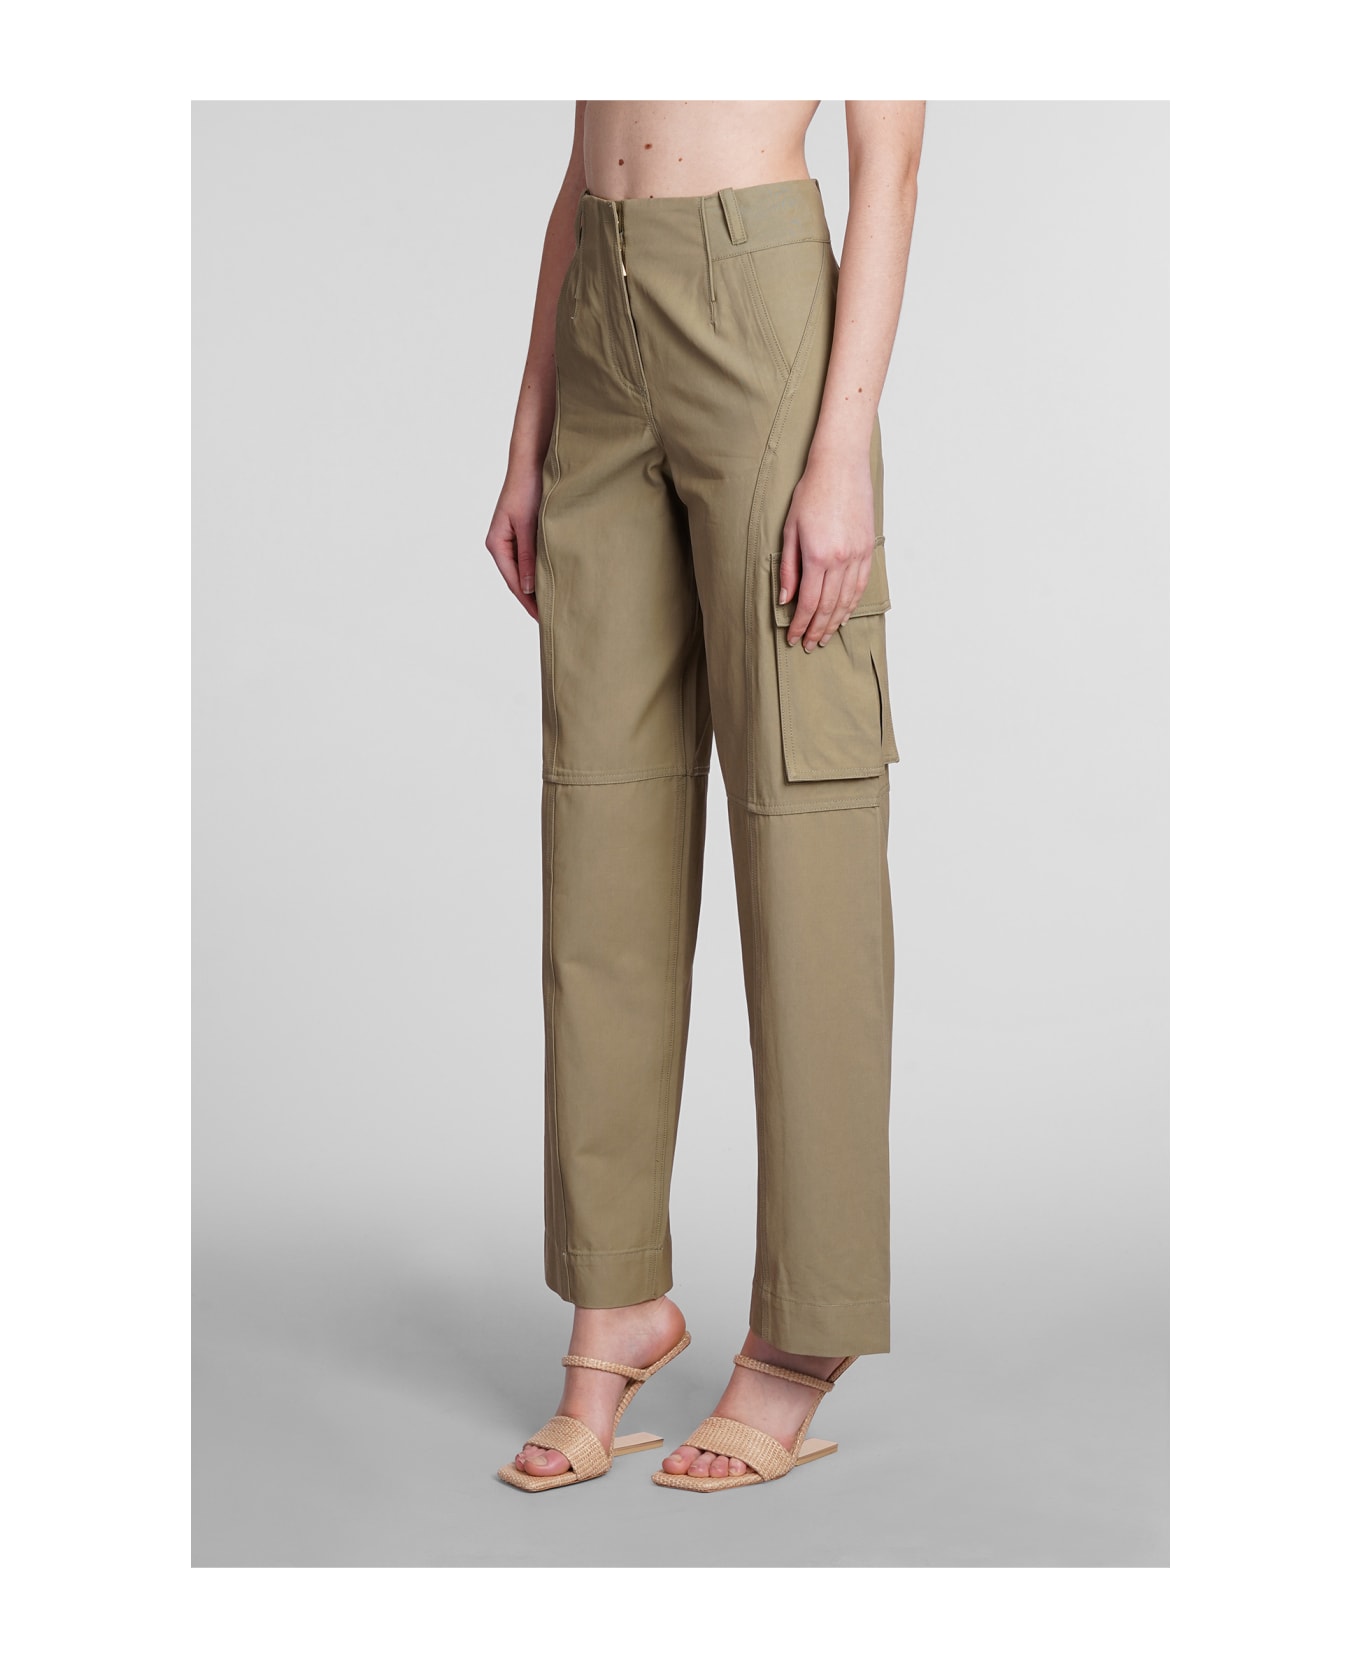 Cult Gaia Adrie Pants In Green Cotton - green